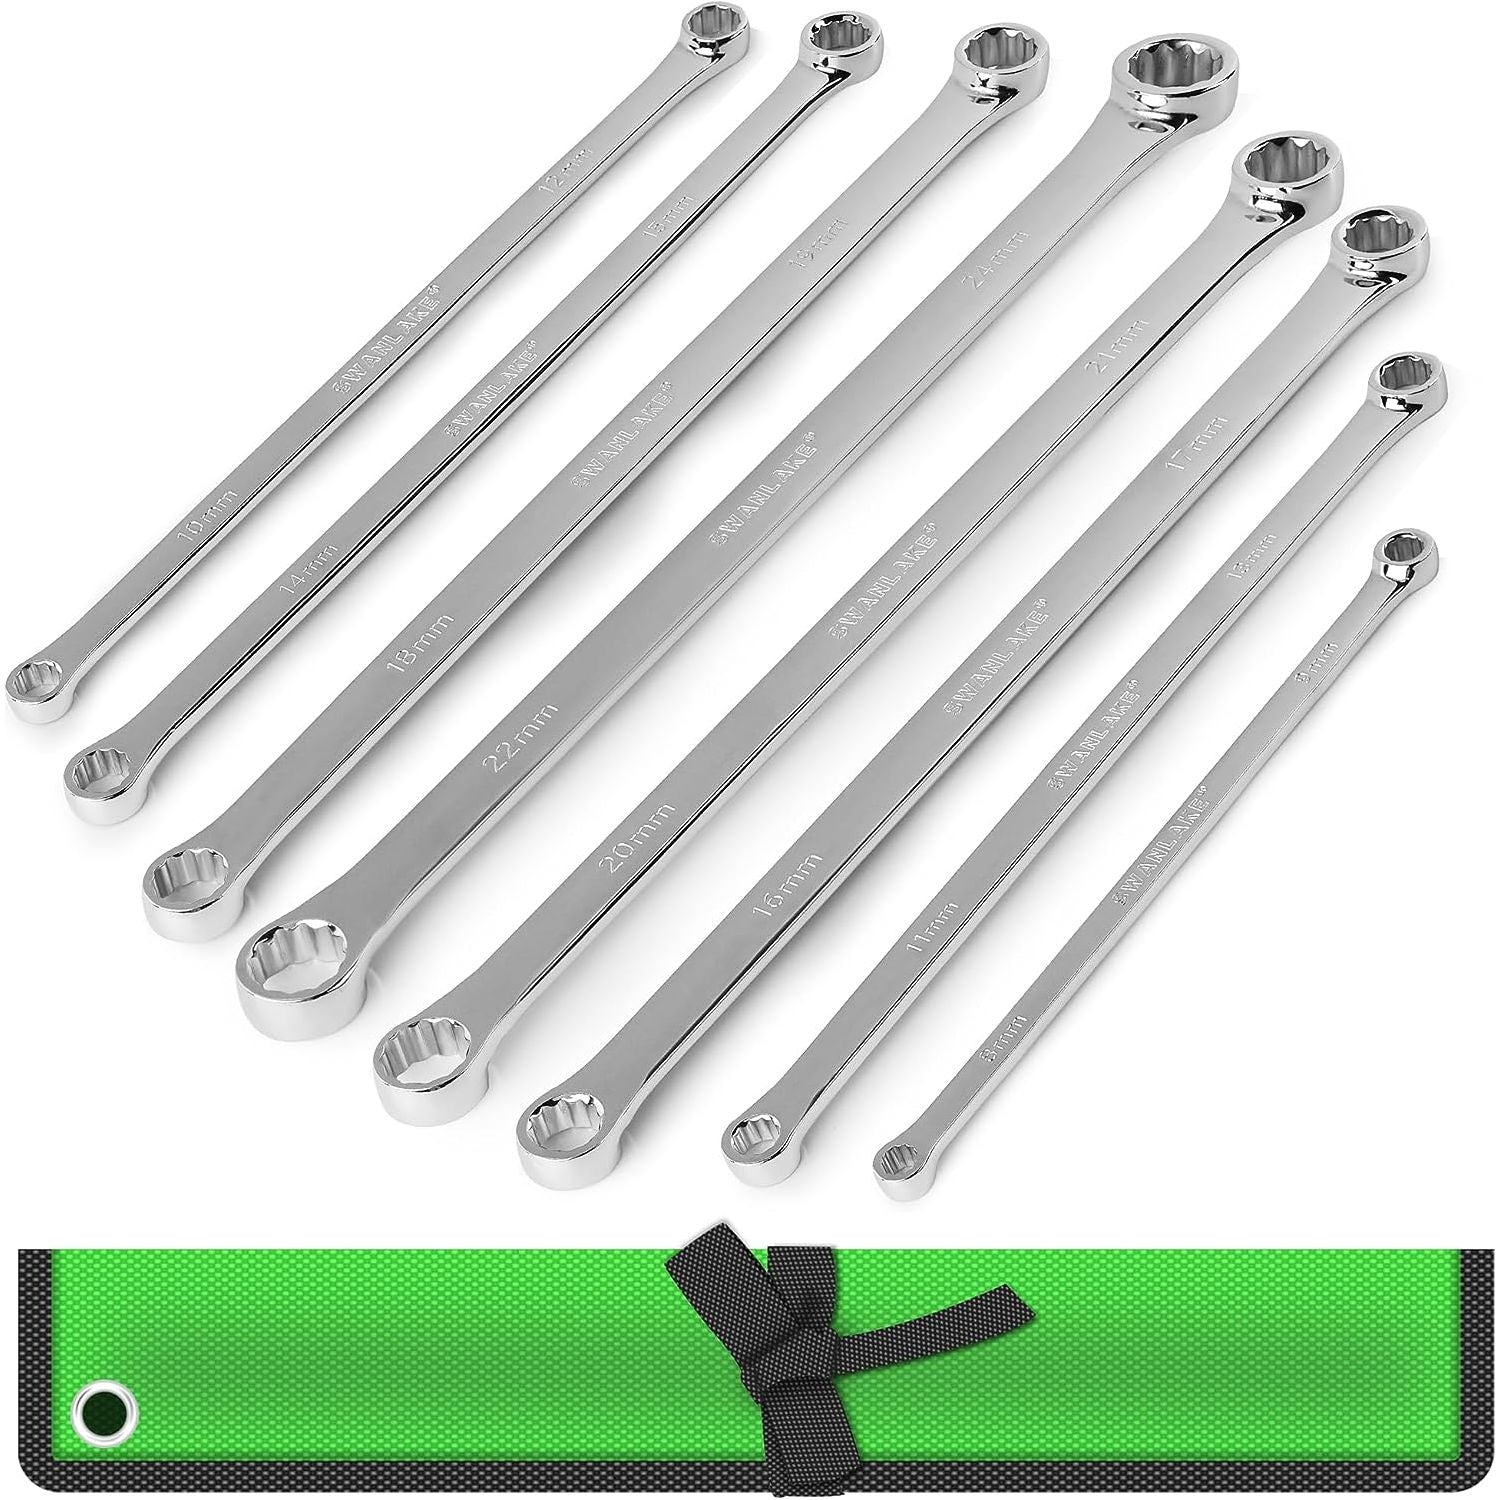 8 Piece Extra Long Double Box End Wrench Set - South East Clearance Centre